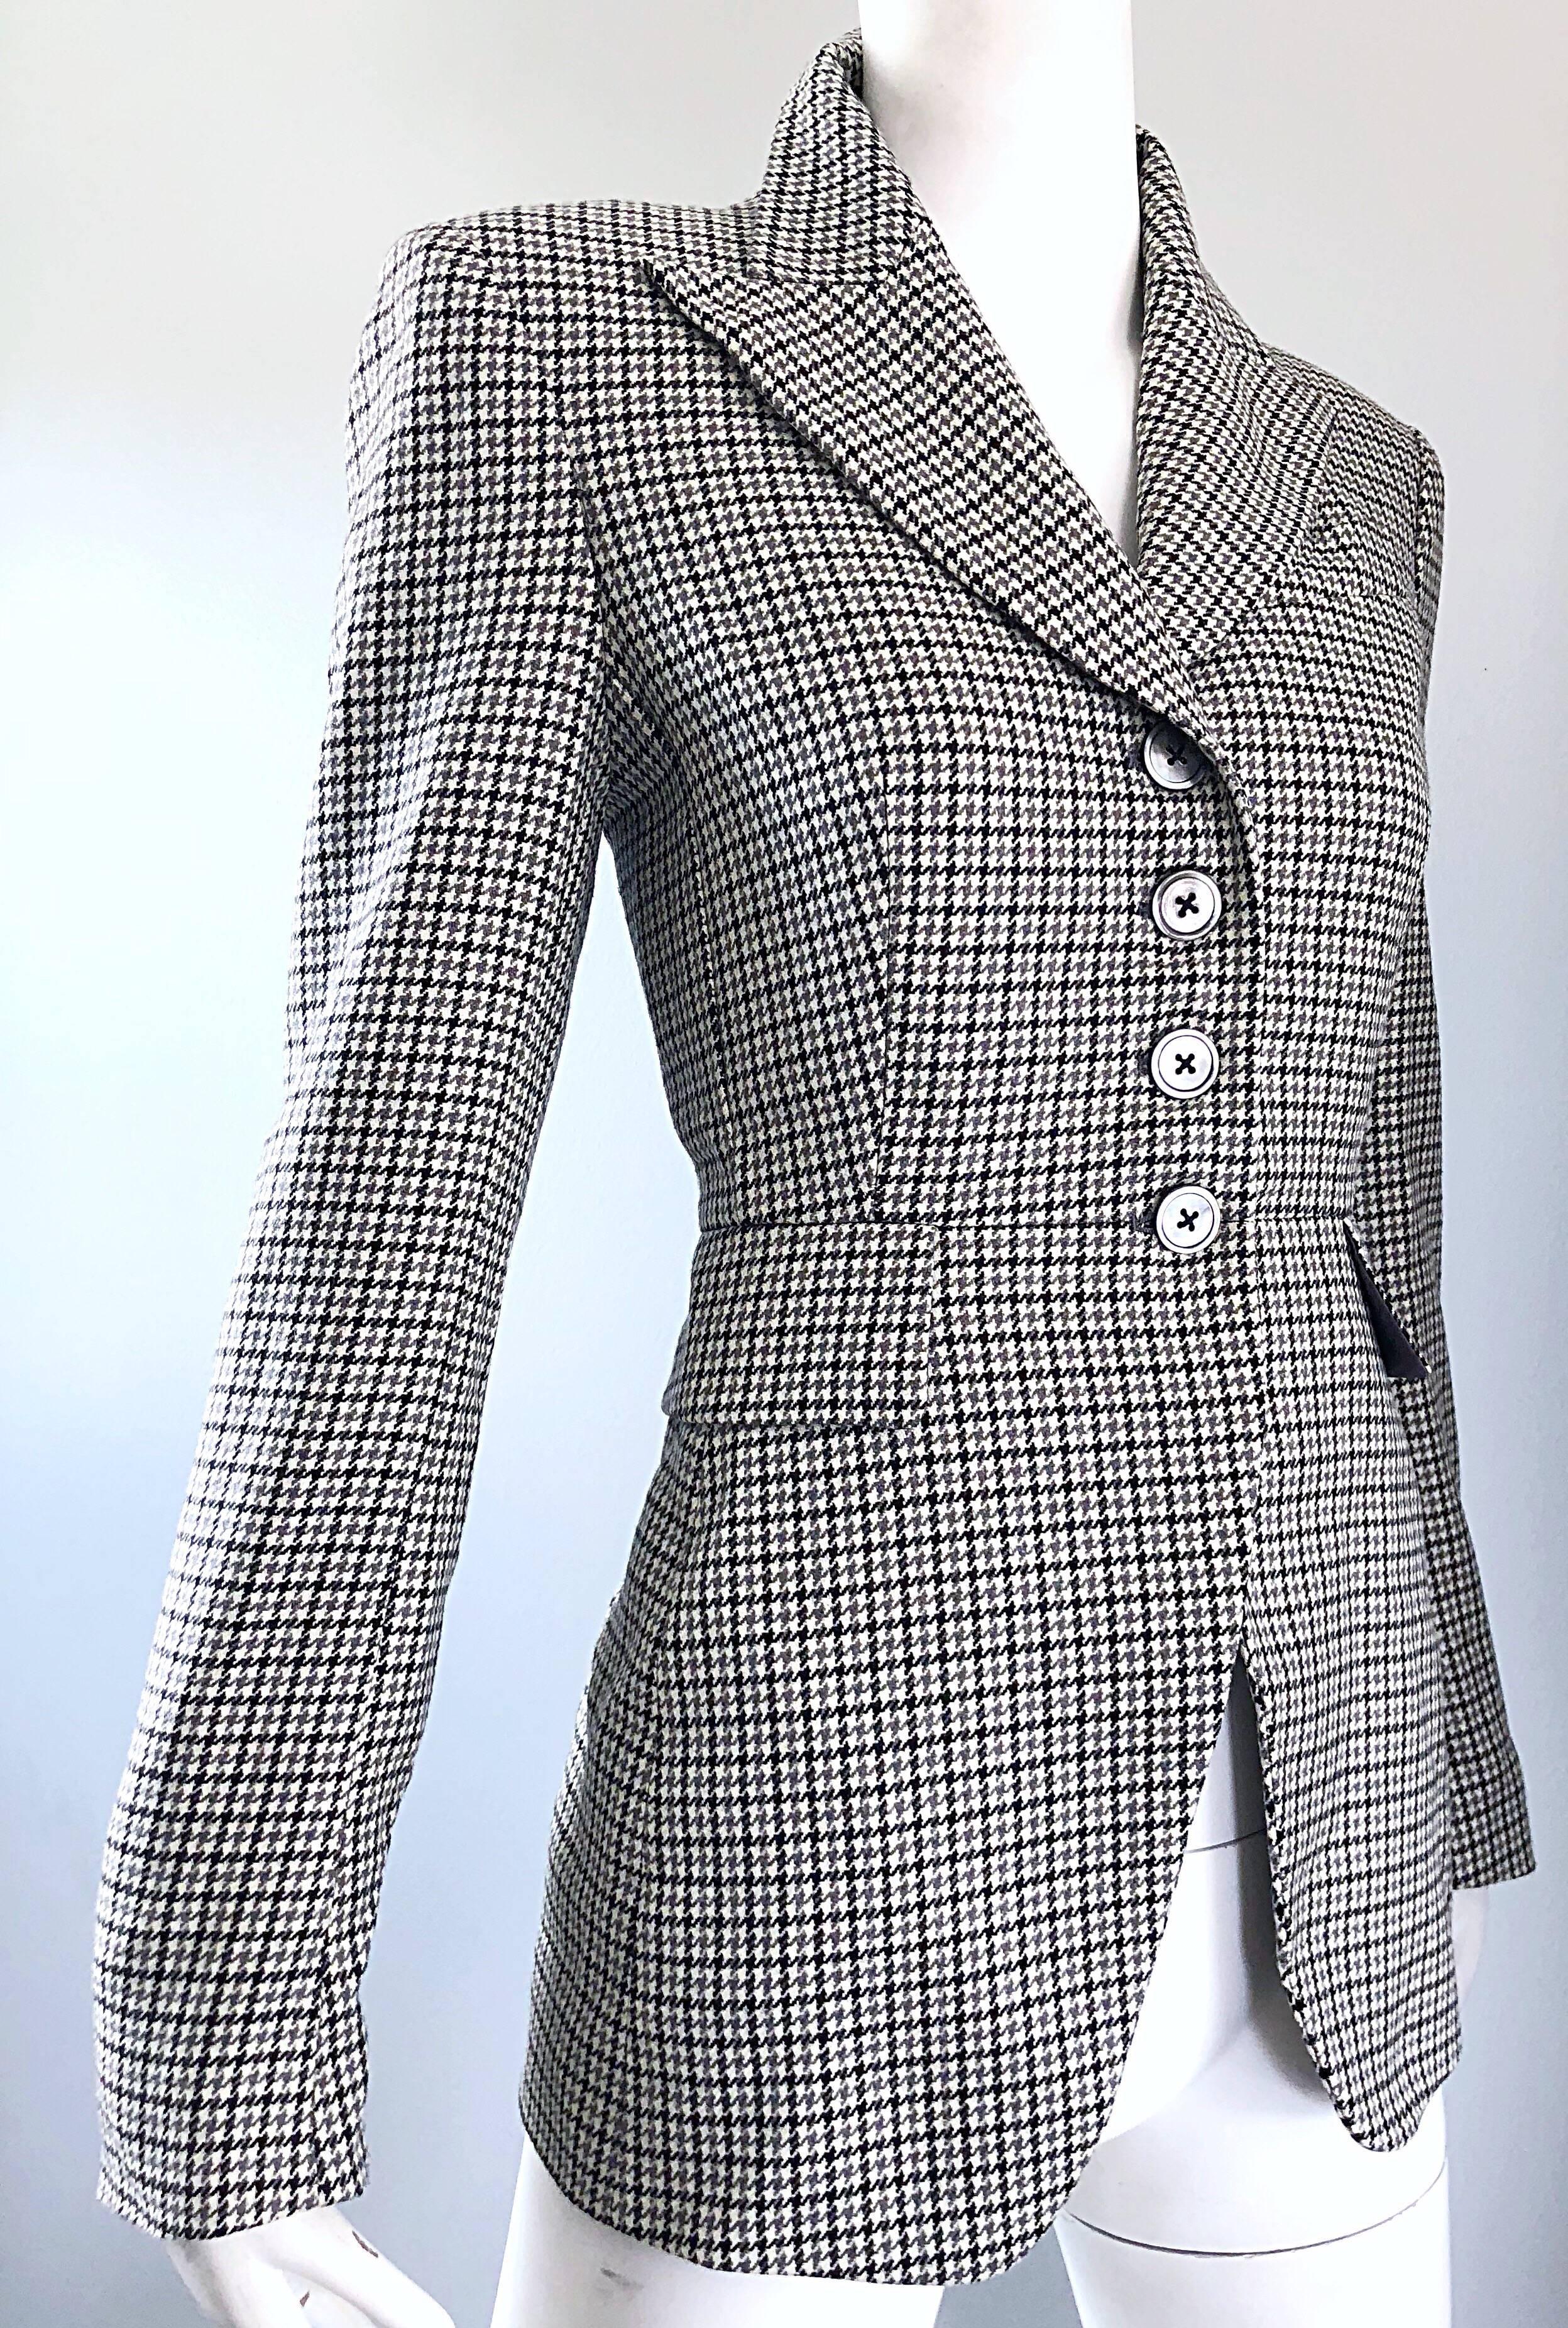 Michael Kors Collection 1990s Size 2 / 4 Gray + Black Houndstooth Blazer Jacket For Sale 2